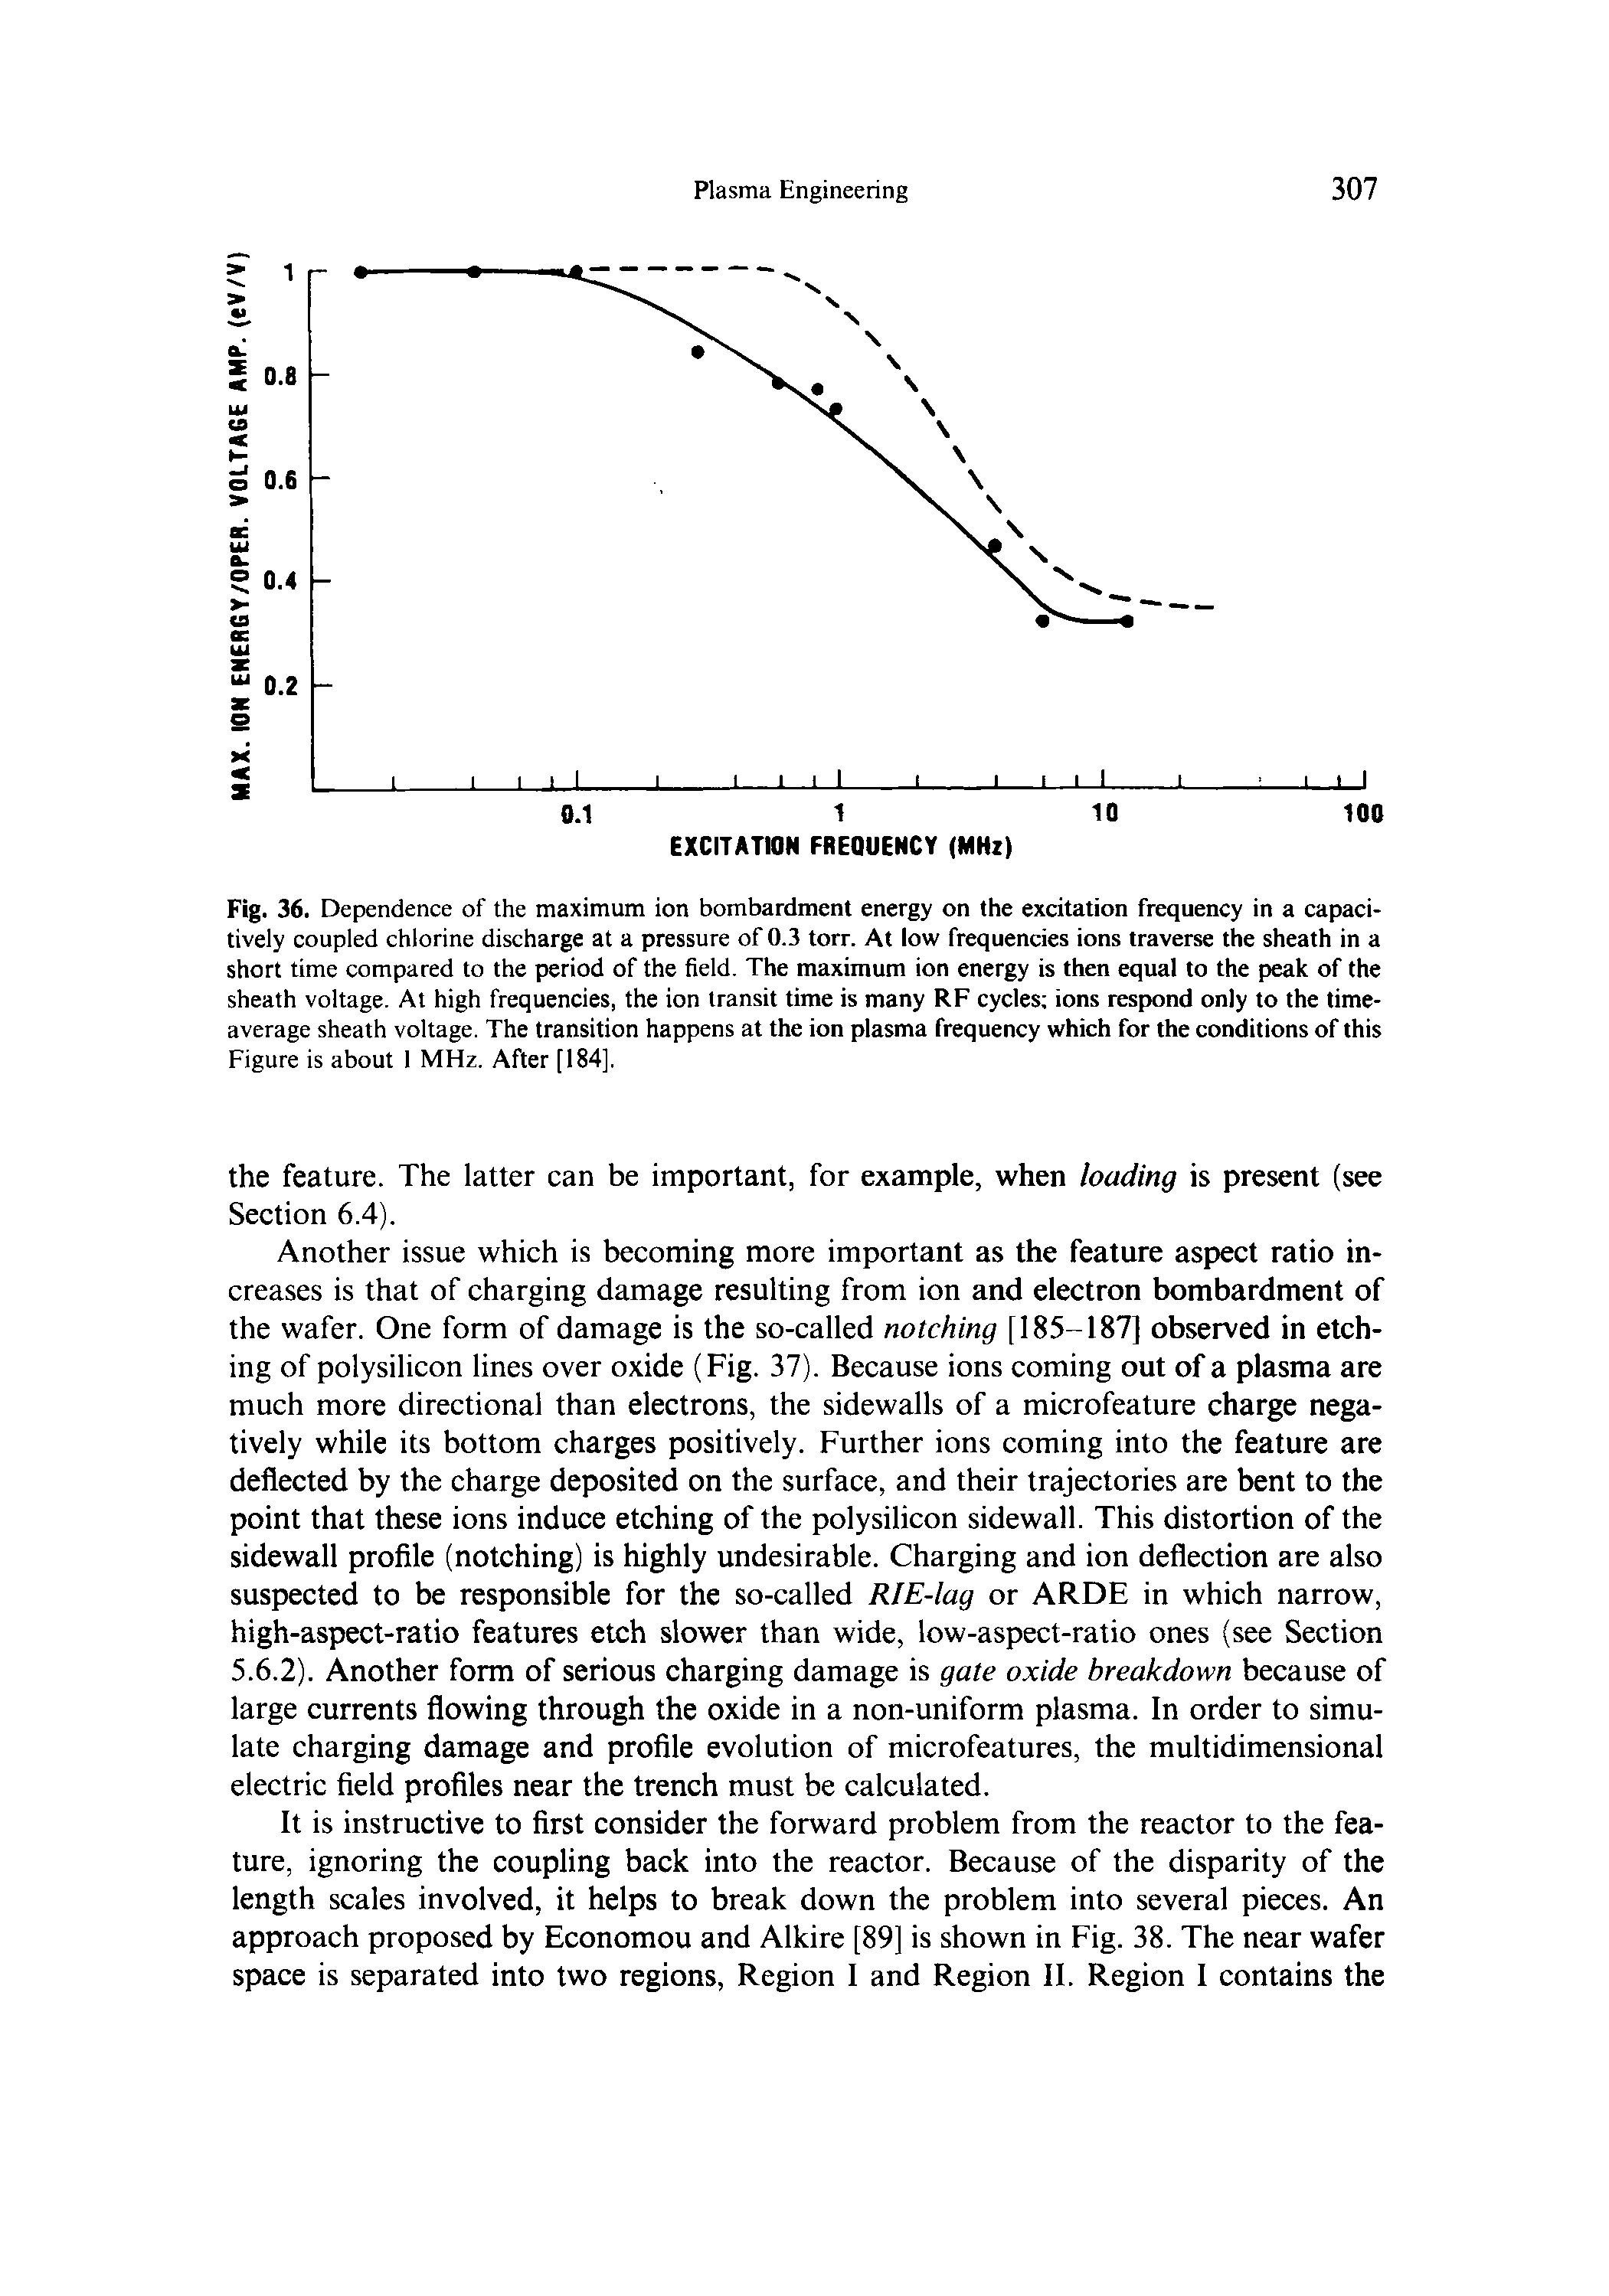 Fig. 36. Dependence of the maximum ion bombardment energy on the excitation frequency in a capaci-tively coupled chlorine discharge at a pressure of 0.3 torr. At low frequencies ions traverse the sheath in a short time compared to the period of the field. The maximum ion energy is then equal to the peak of the sheath voltage. At high frequencies, the ion transit time is many RF cycles ions respond only to the time-average sheath voltage. The transition happens at the ion plasma frequency which for the conditions of this Figure is about I MHz. After [184],...